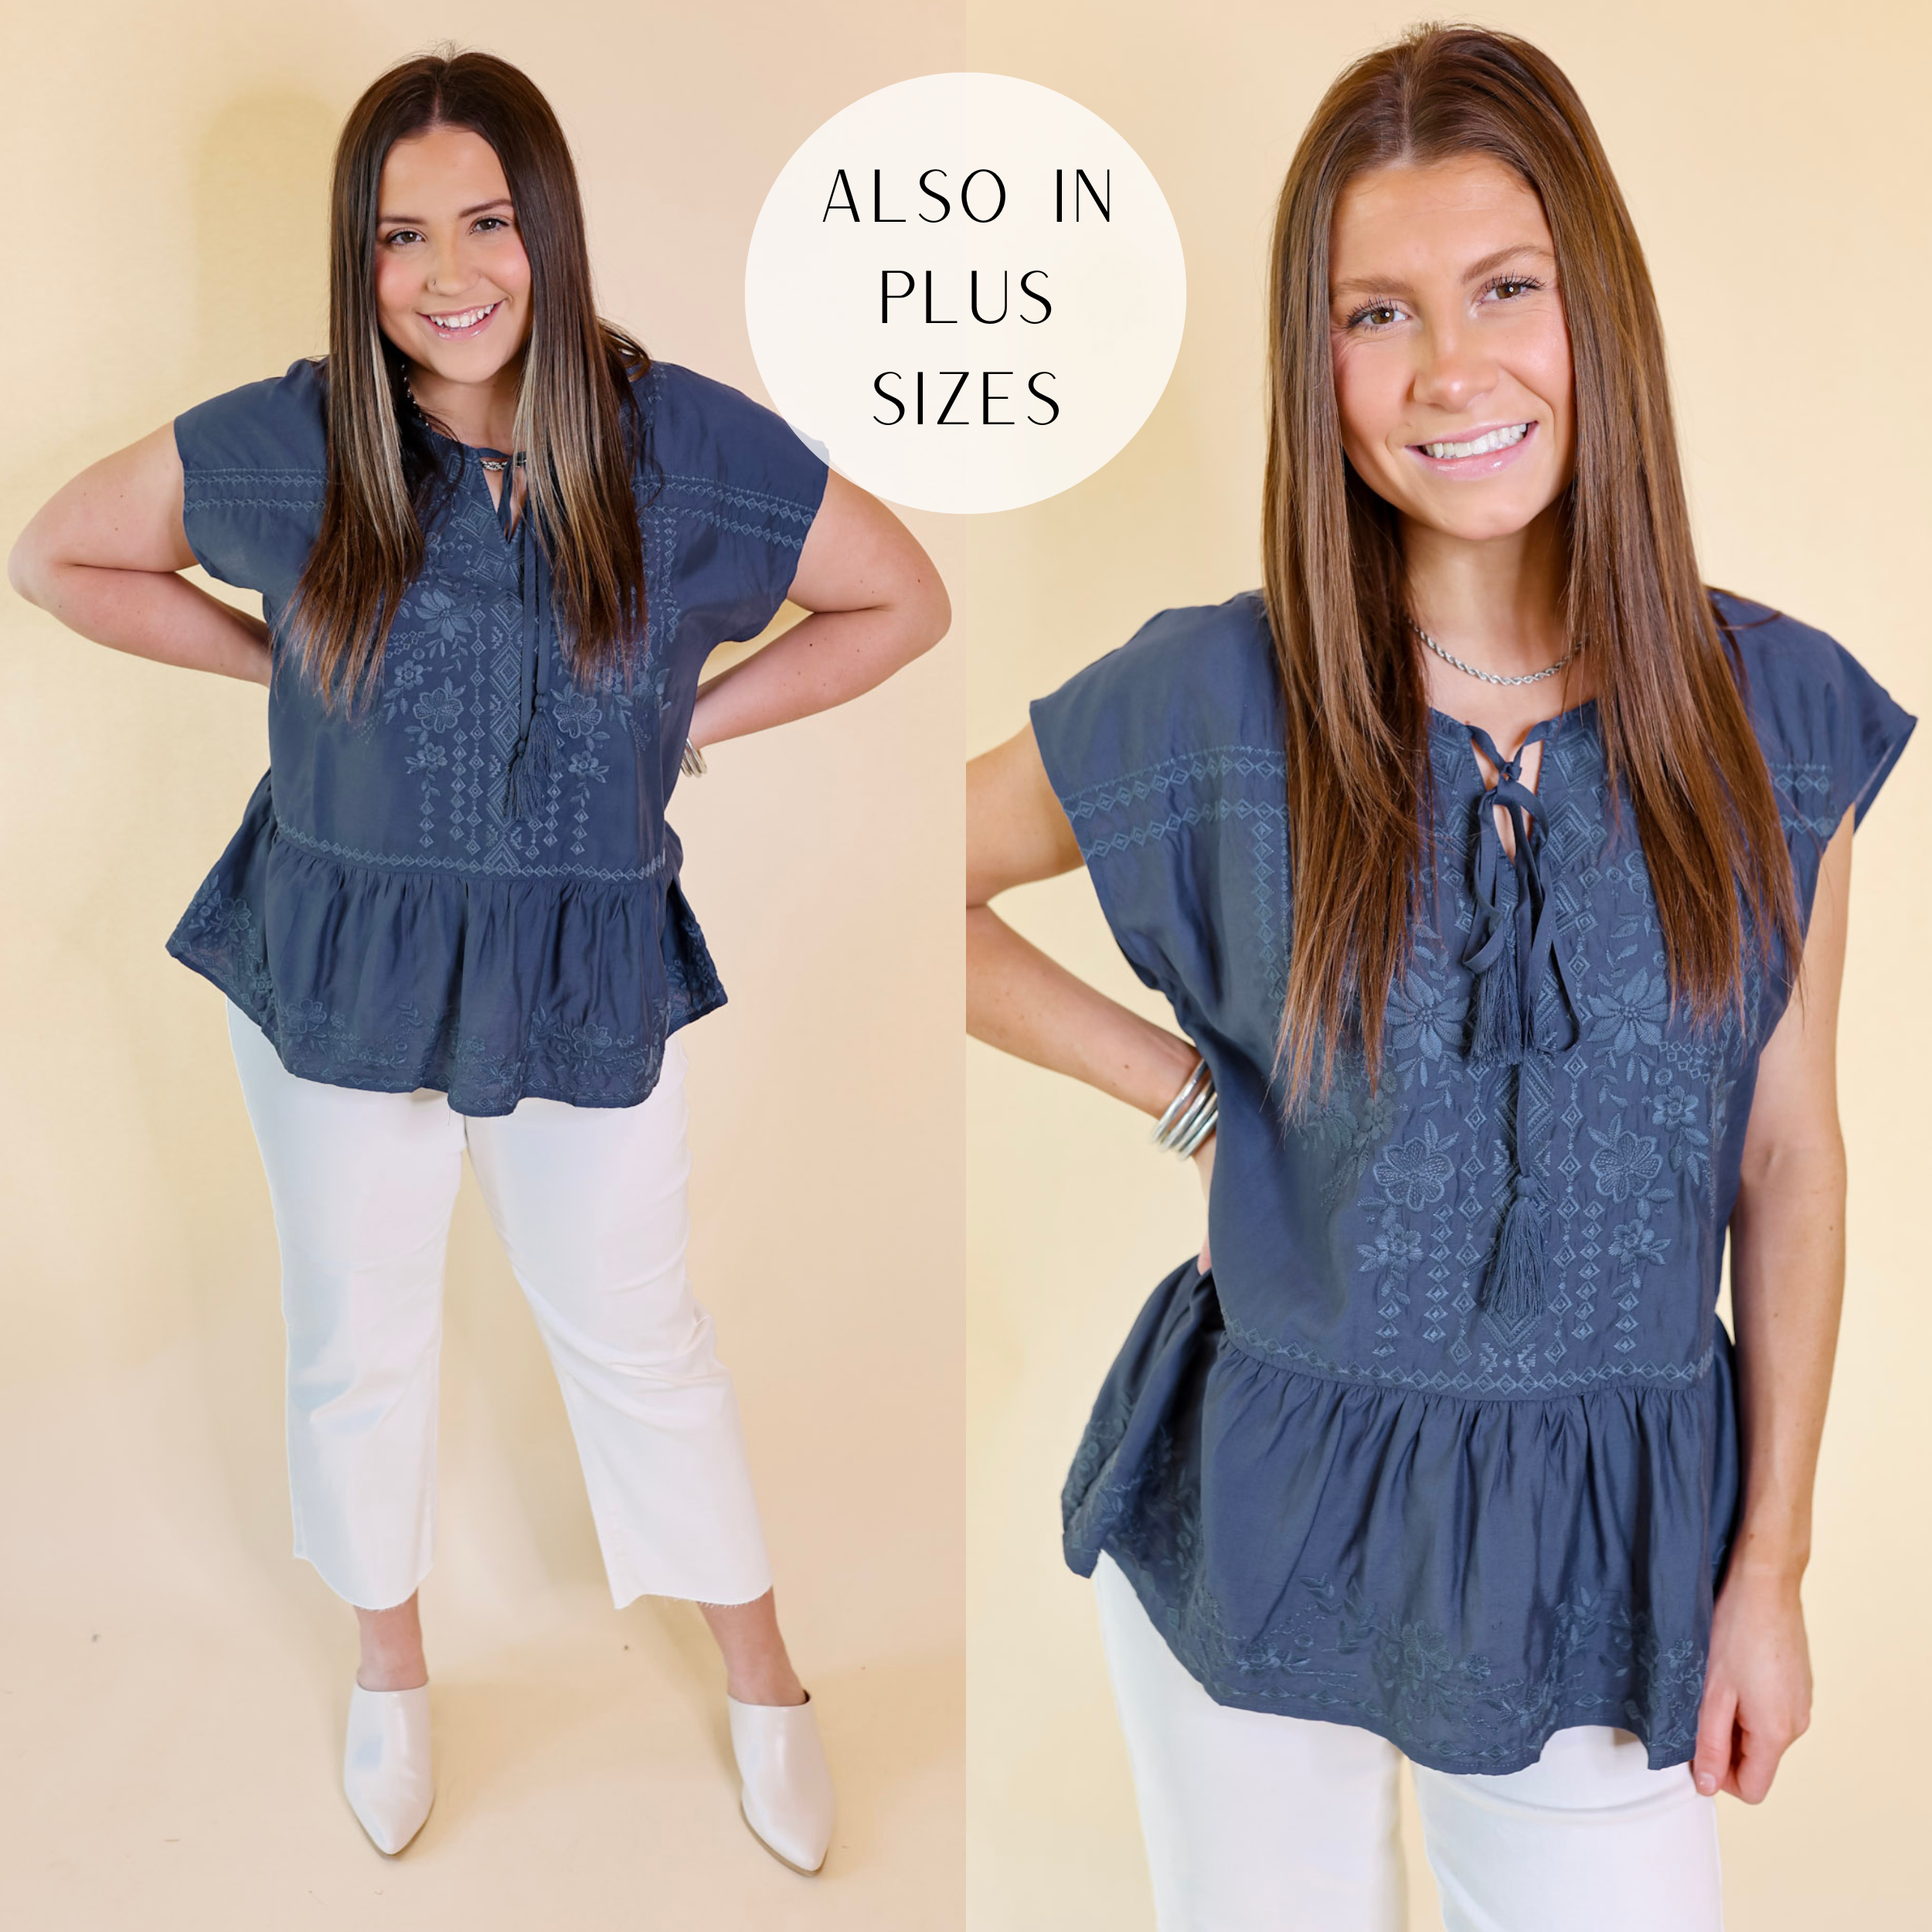 Models are wearing a navy blue peplum top with a front keyhole and navy embroidery on the front. Both models have this top paired with white jeans, white mules, and silver jewelry.